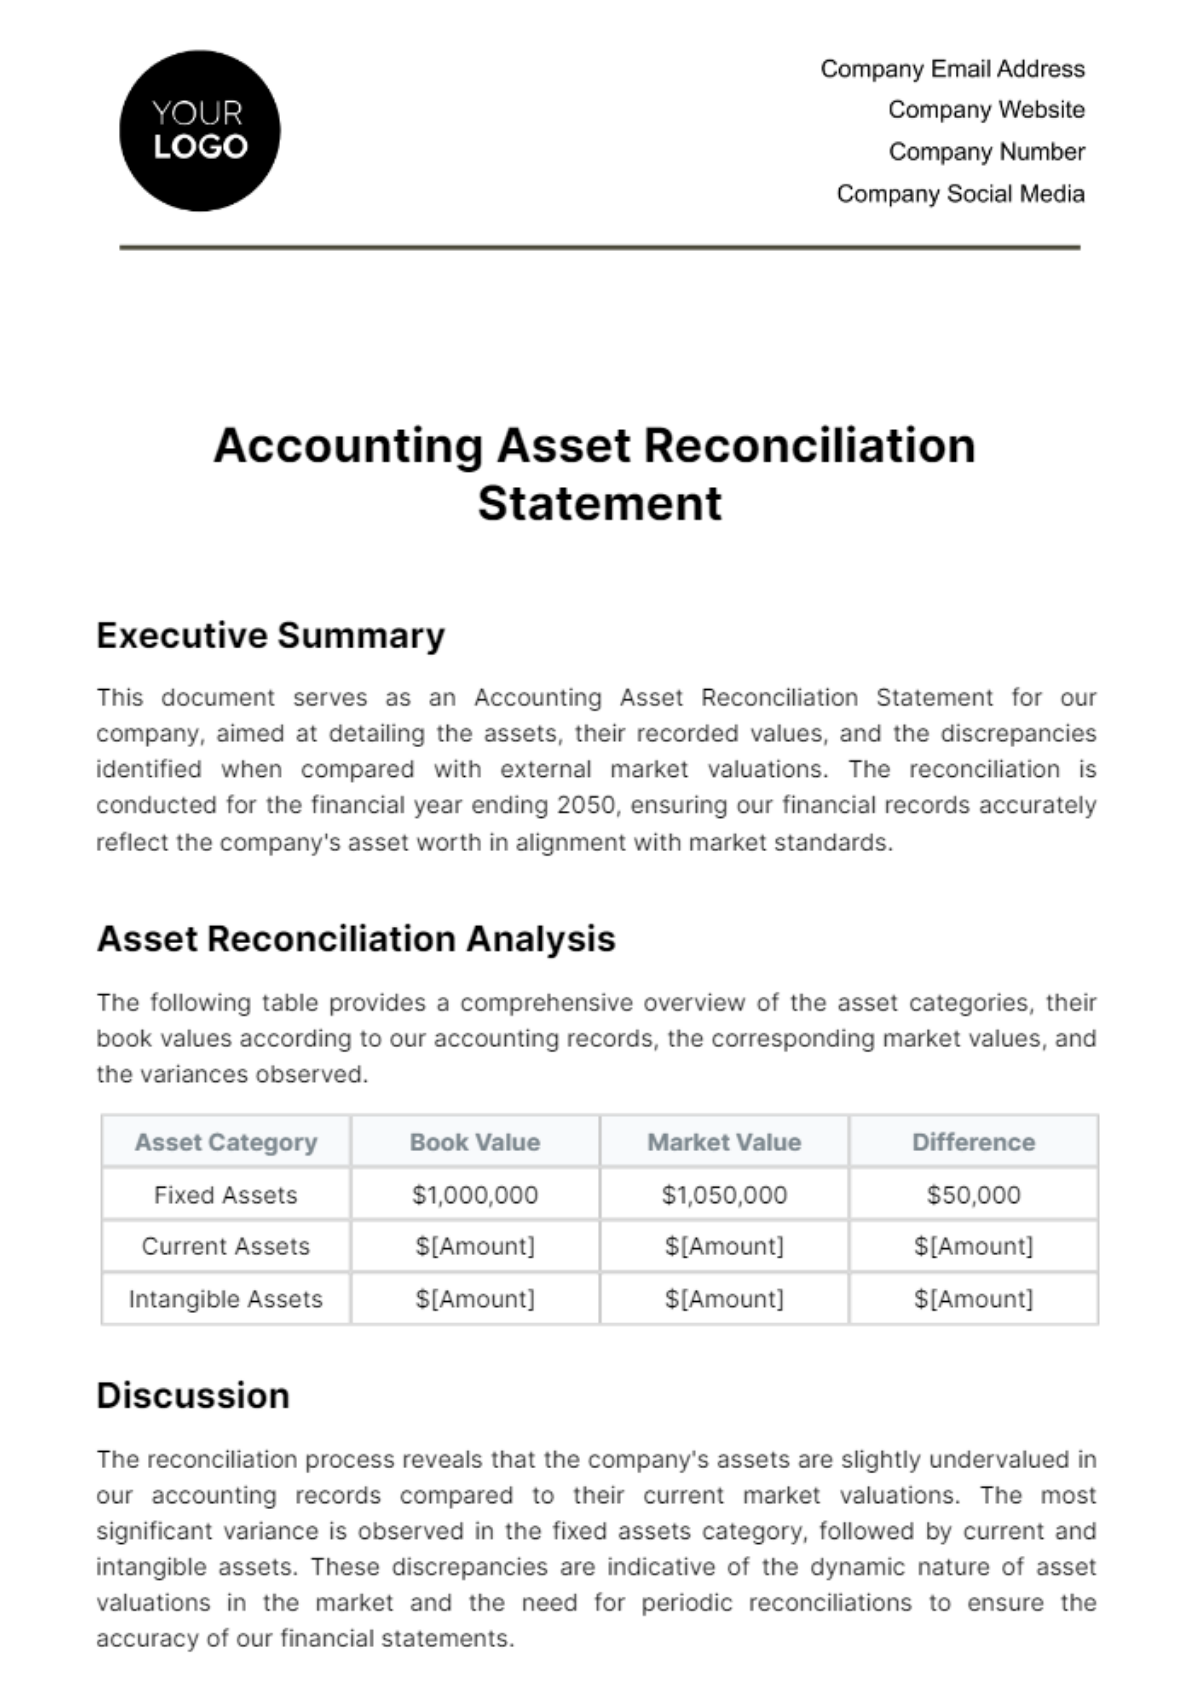 Free Accounting Asset Reconciliation Statement Template